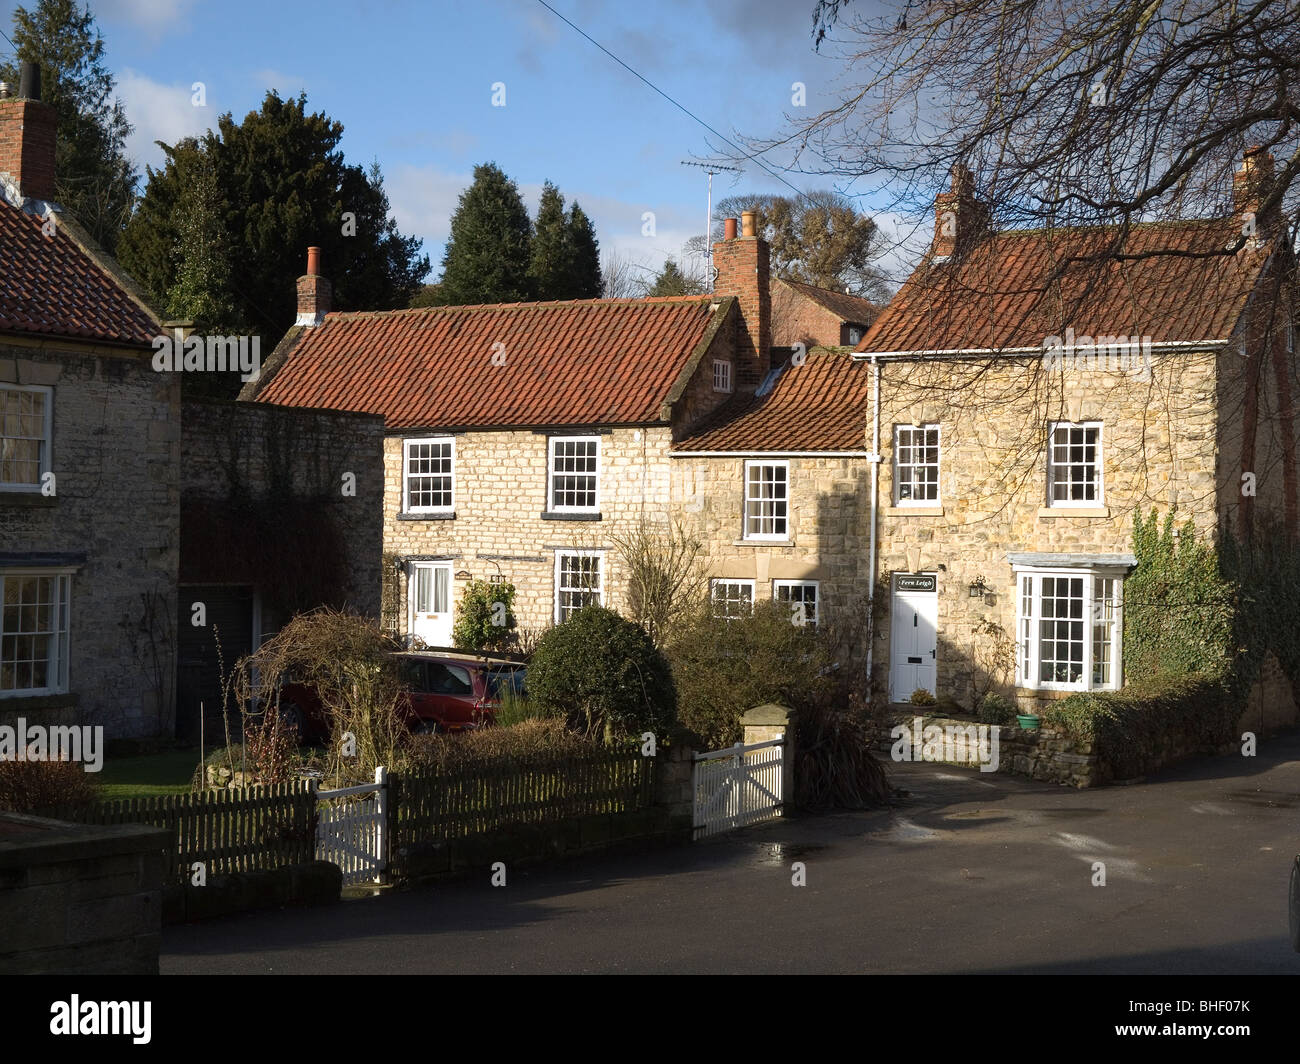 Typical stone dwelling houses or cottages in local style at Pickering North Yorkshire Stock Photo